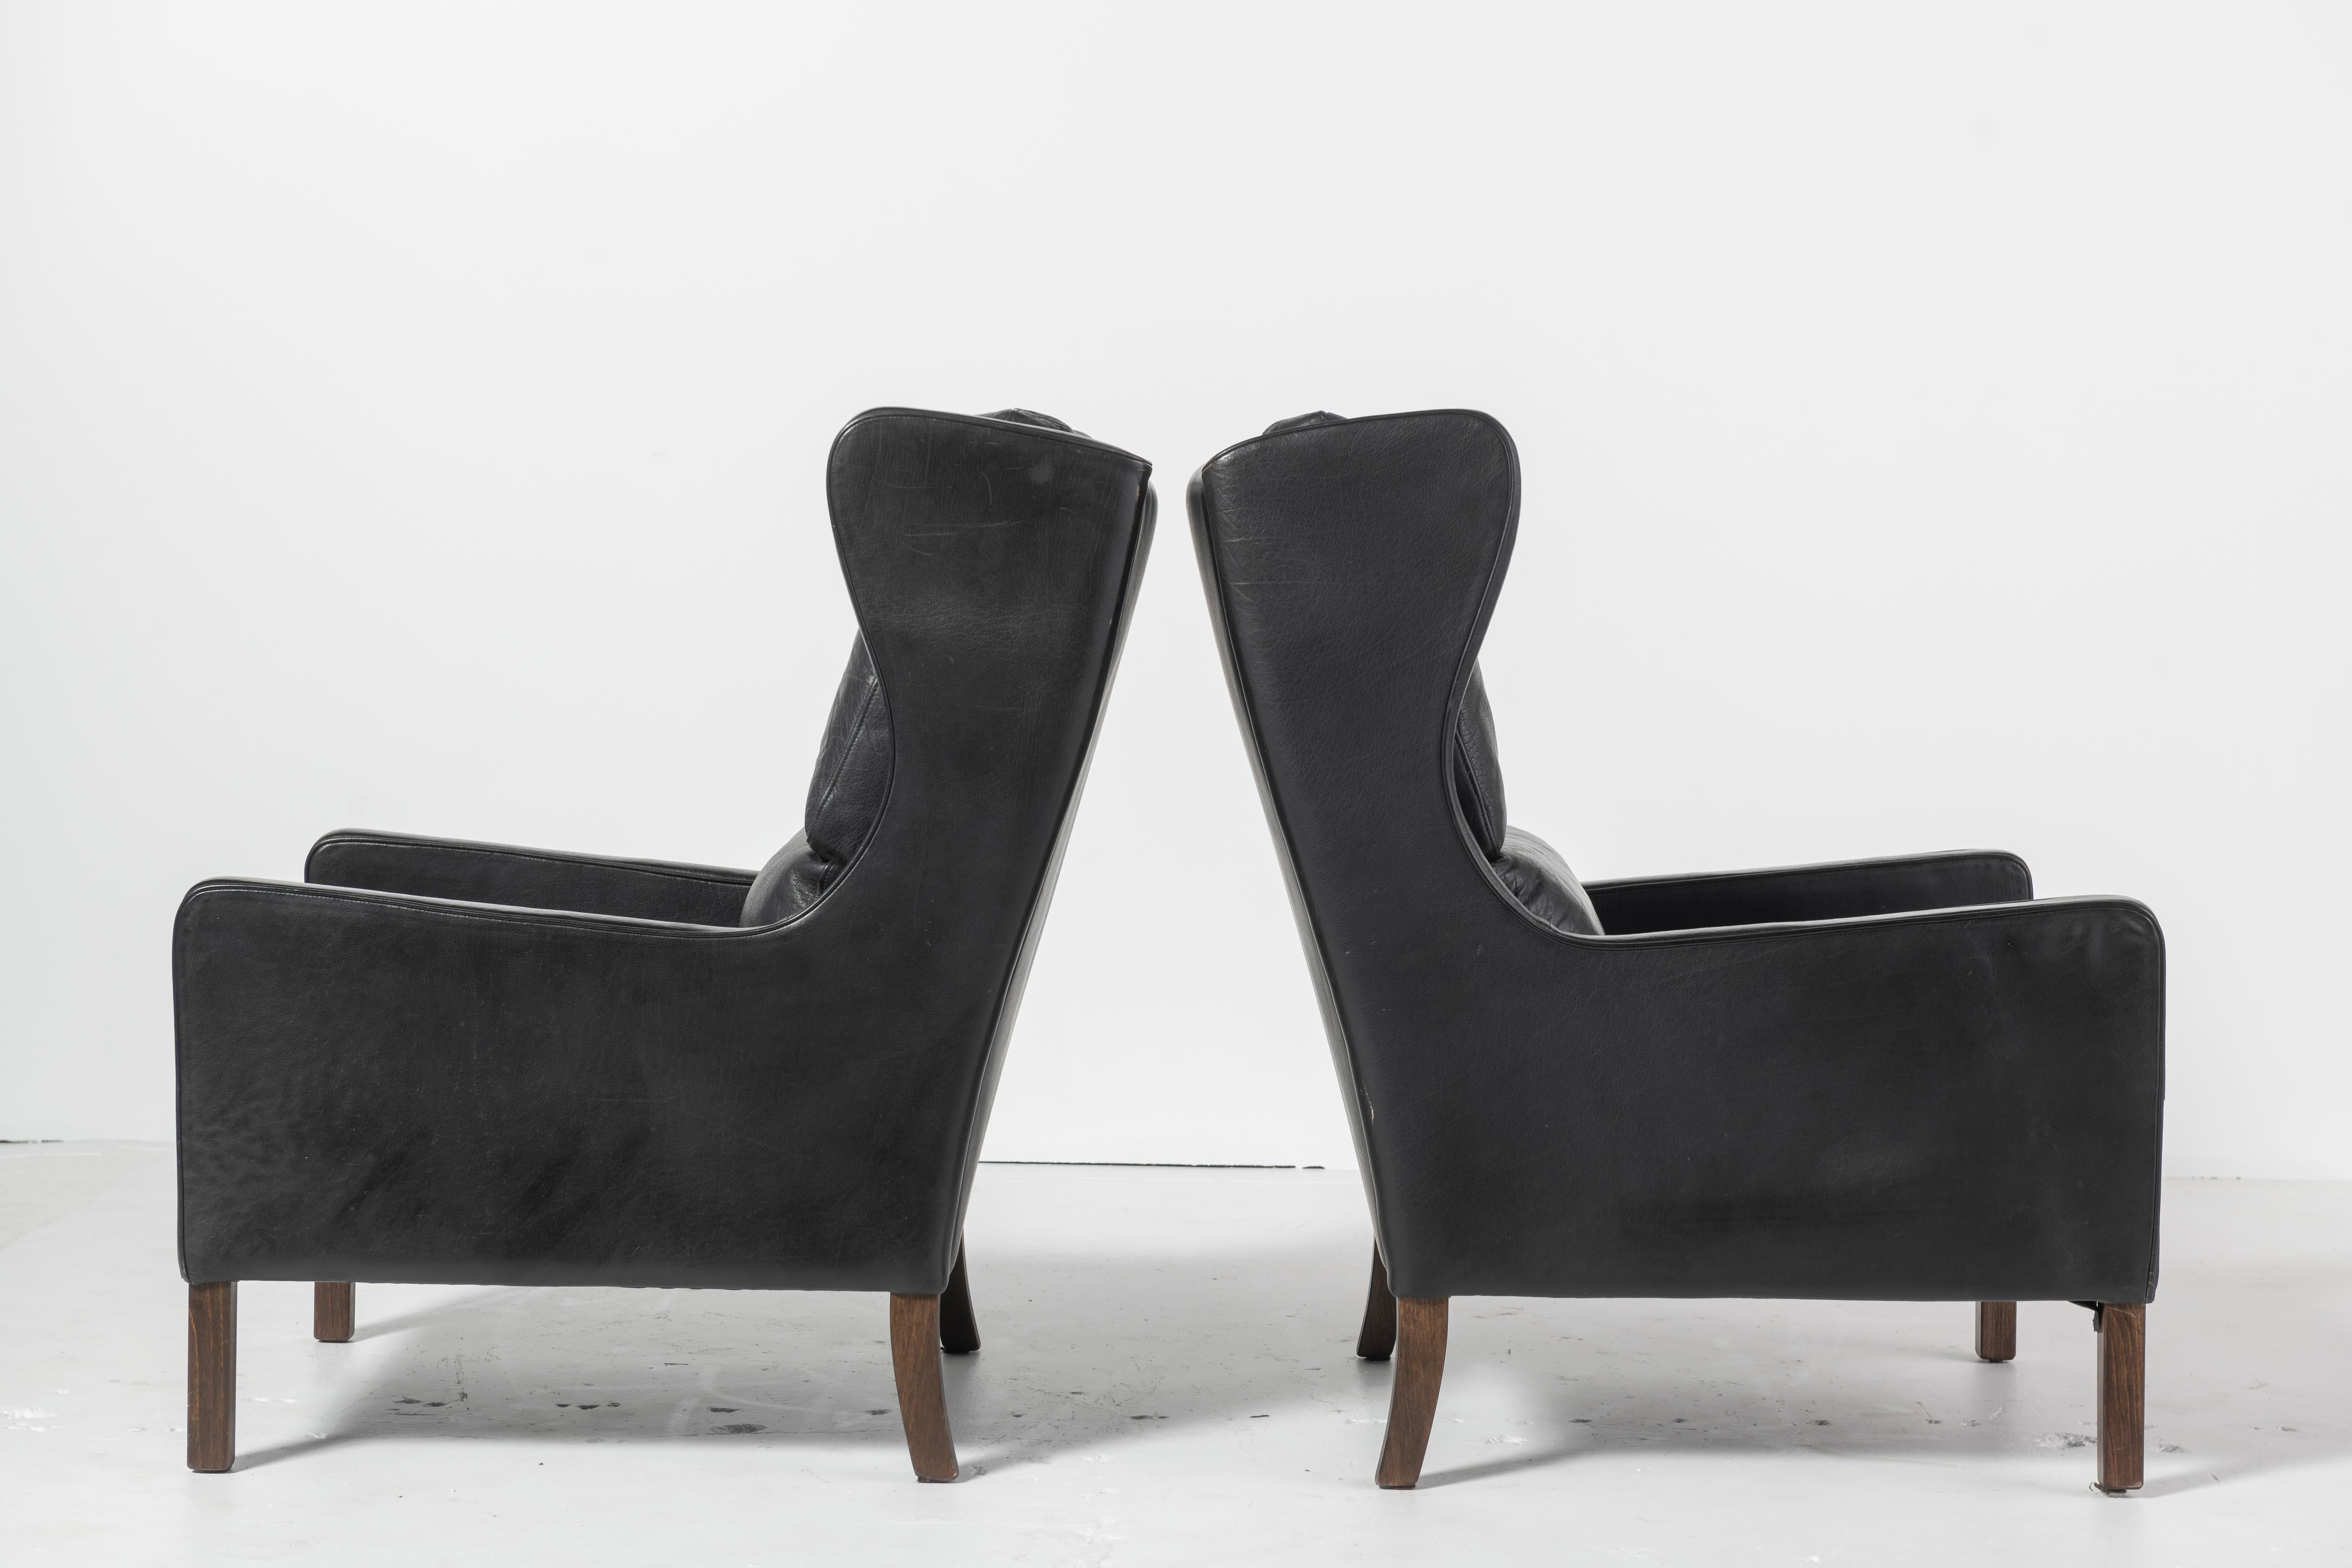 Pair of Danish Mid-Century Modern Black Leather Wingback Chairs 1